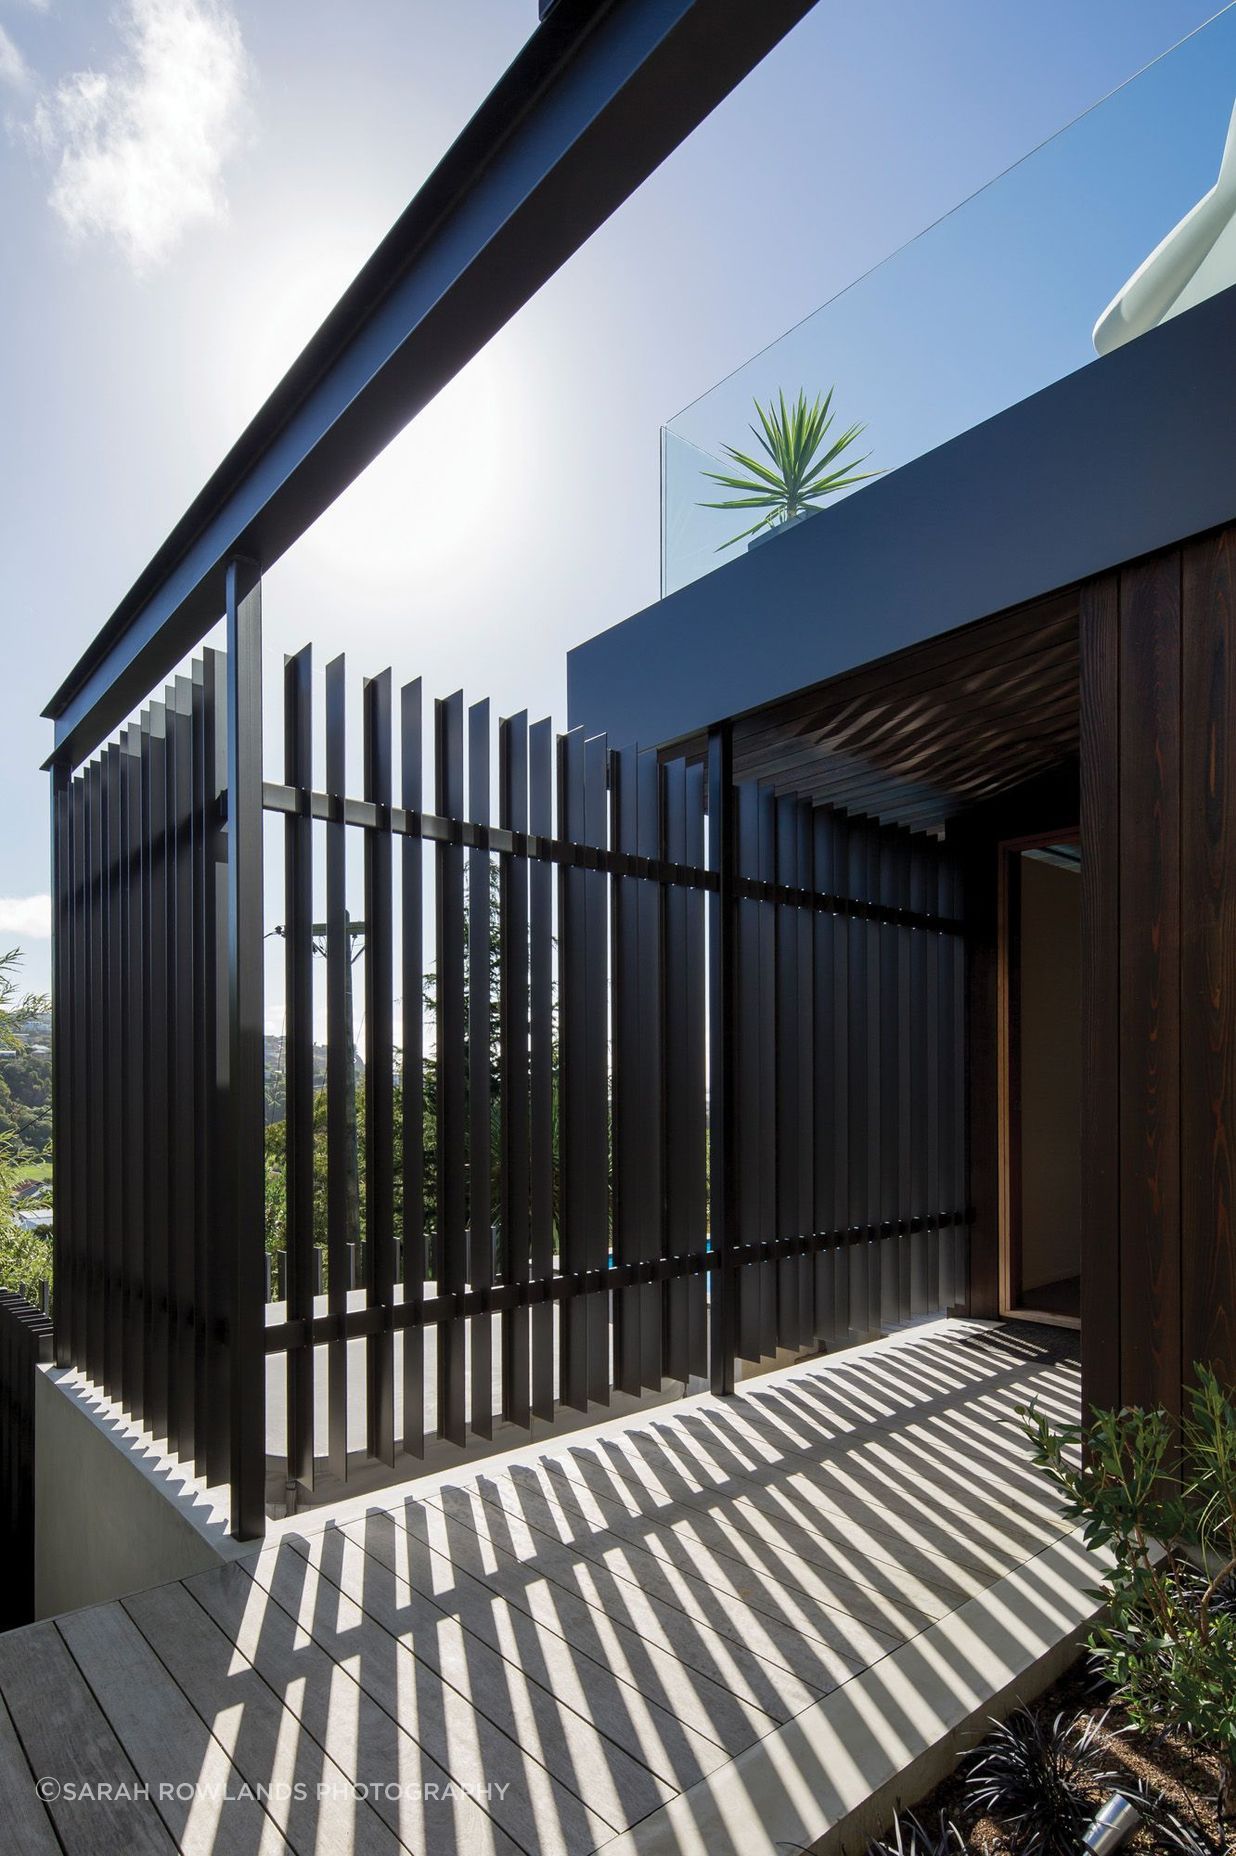 Exposed steel beams are a nod to Californian mid-century modernism.